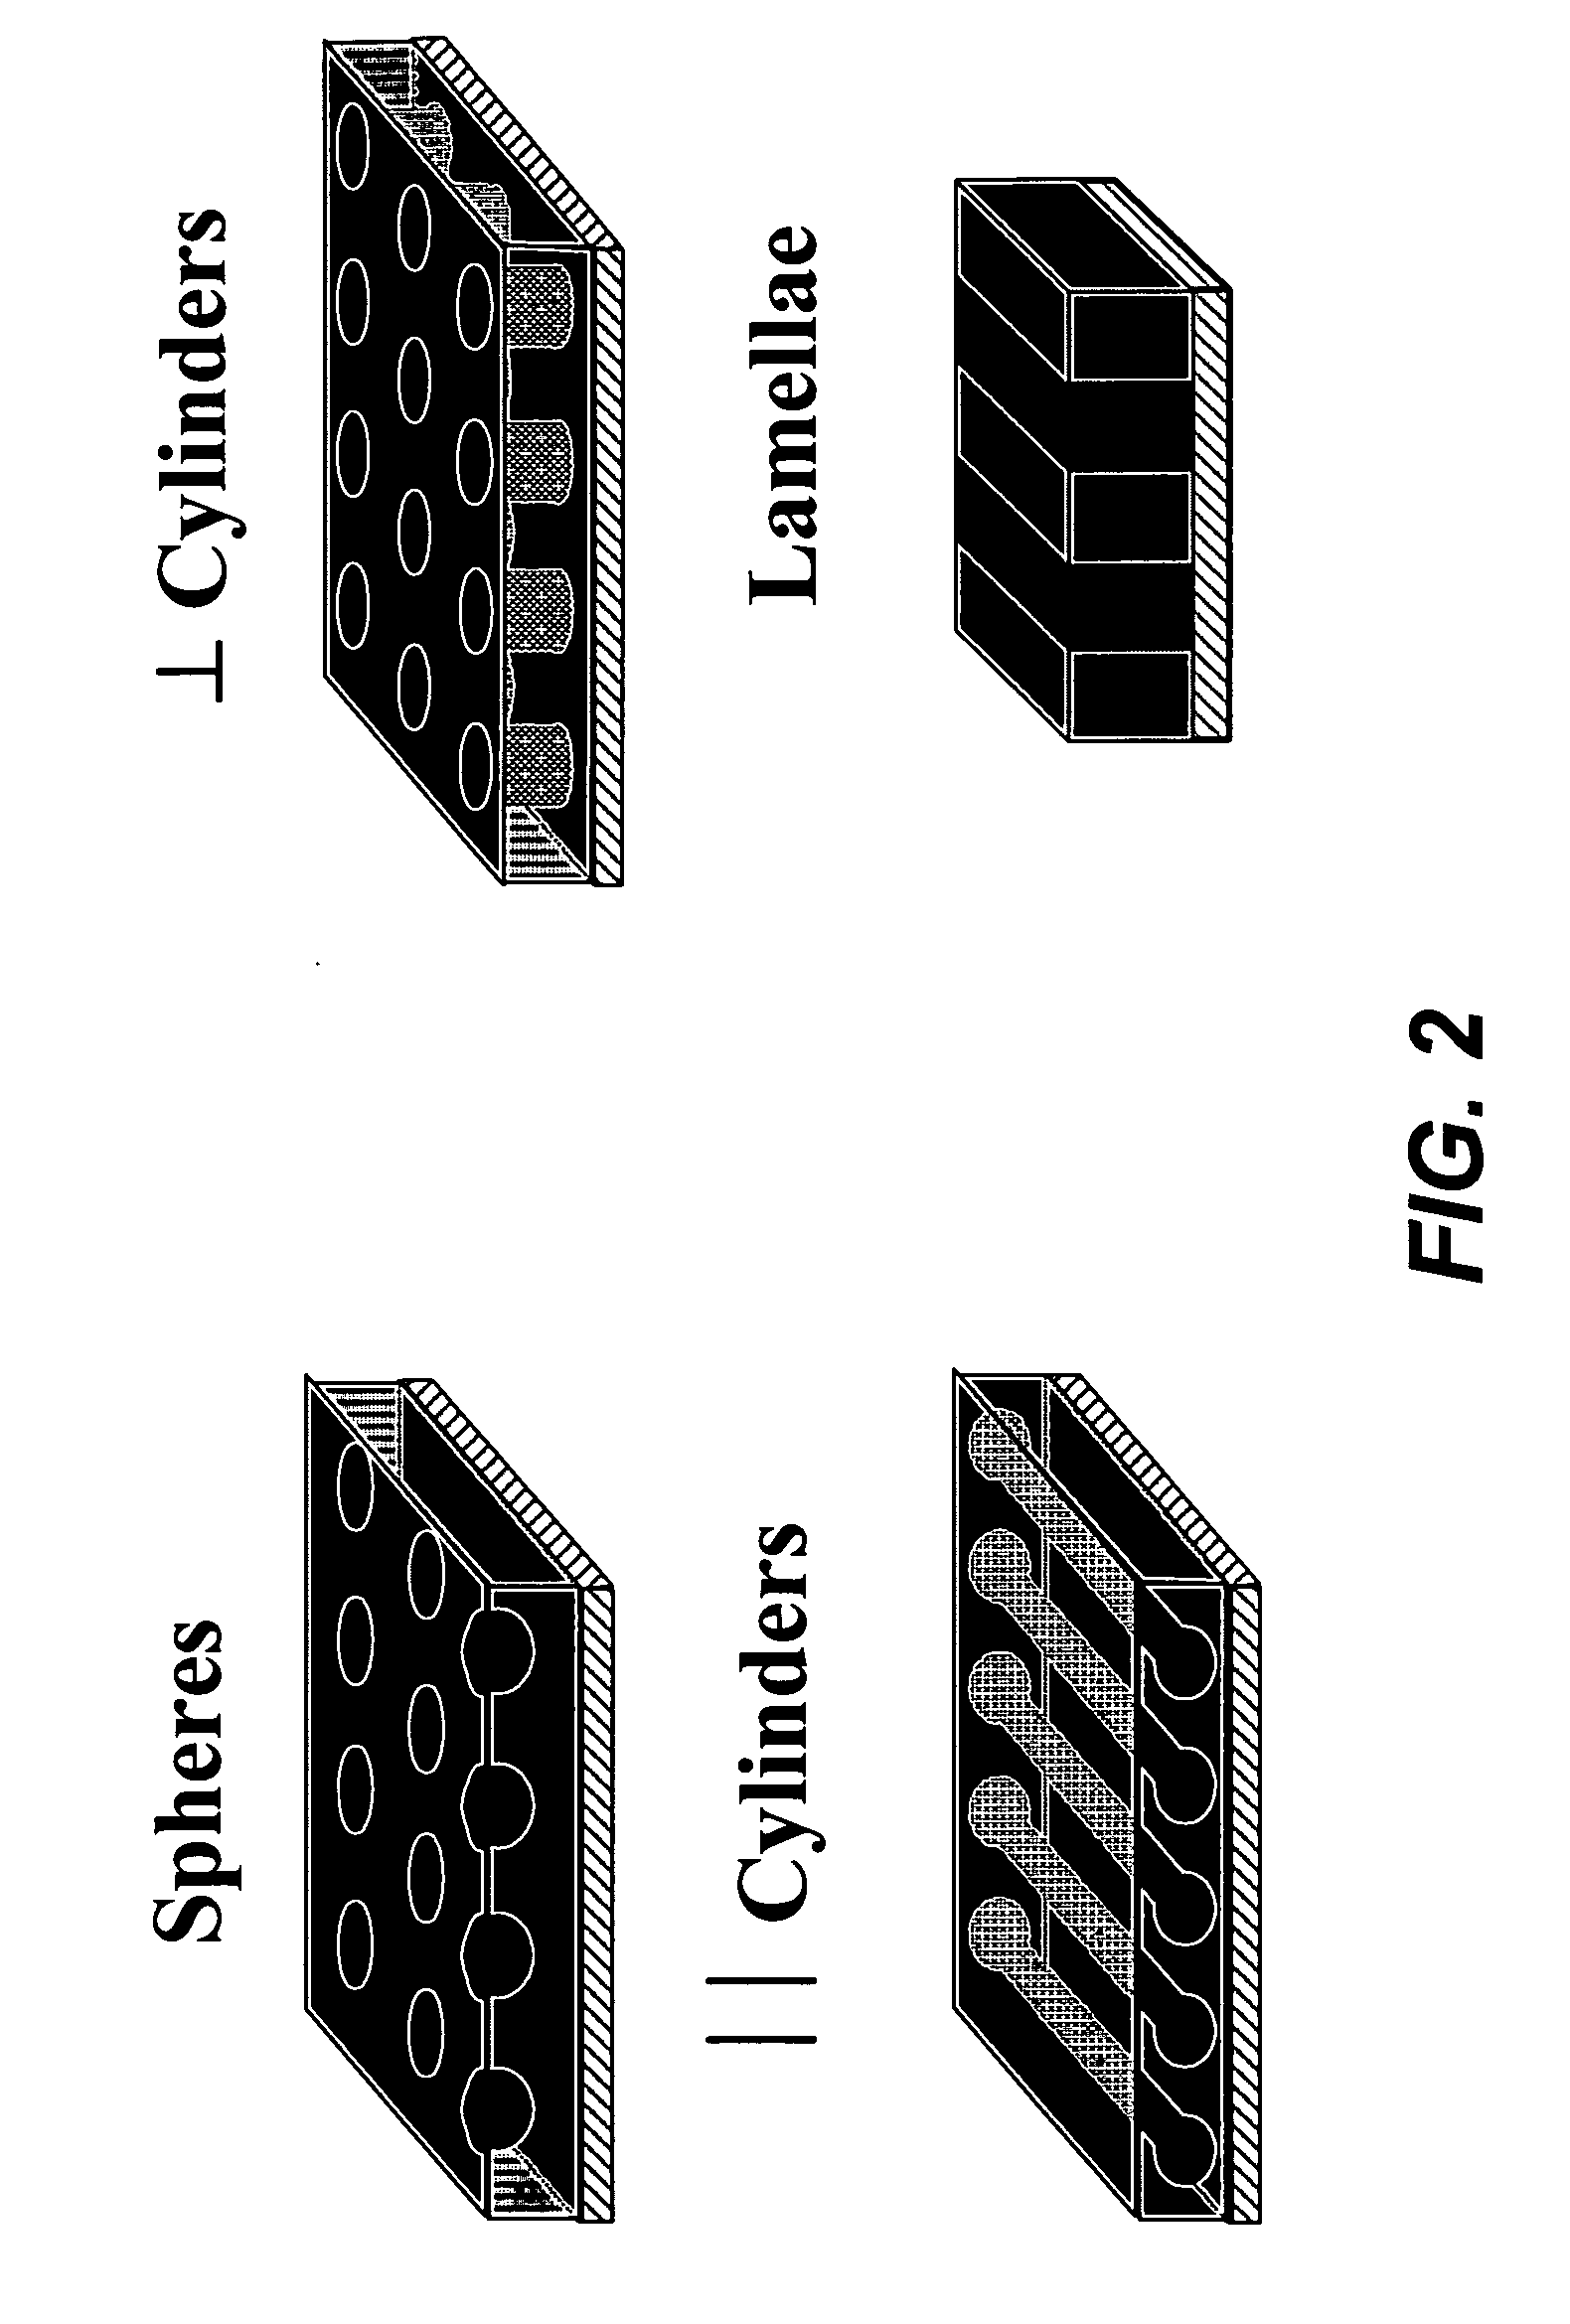 Fabrication of complex three-dimensional structures based on directed assembly of self-assembling materials on activated two-dimensional templates